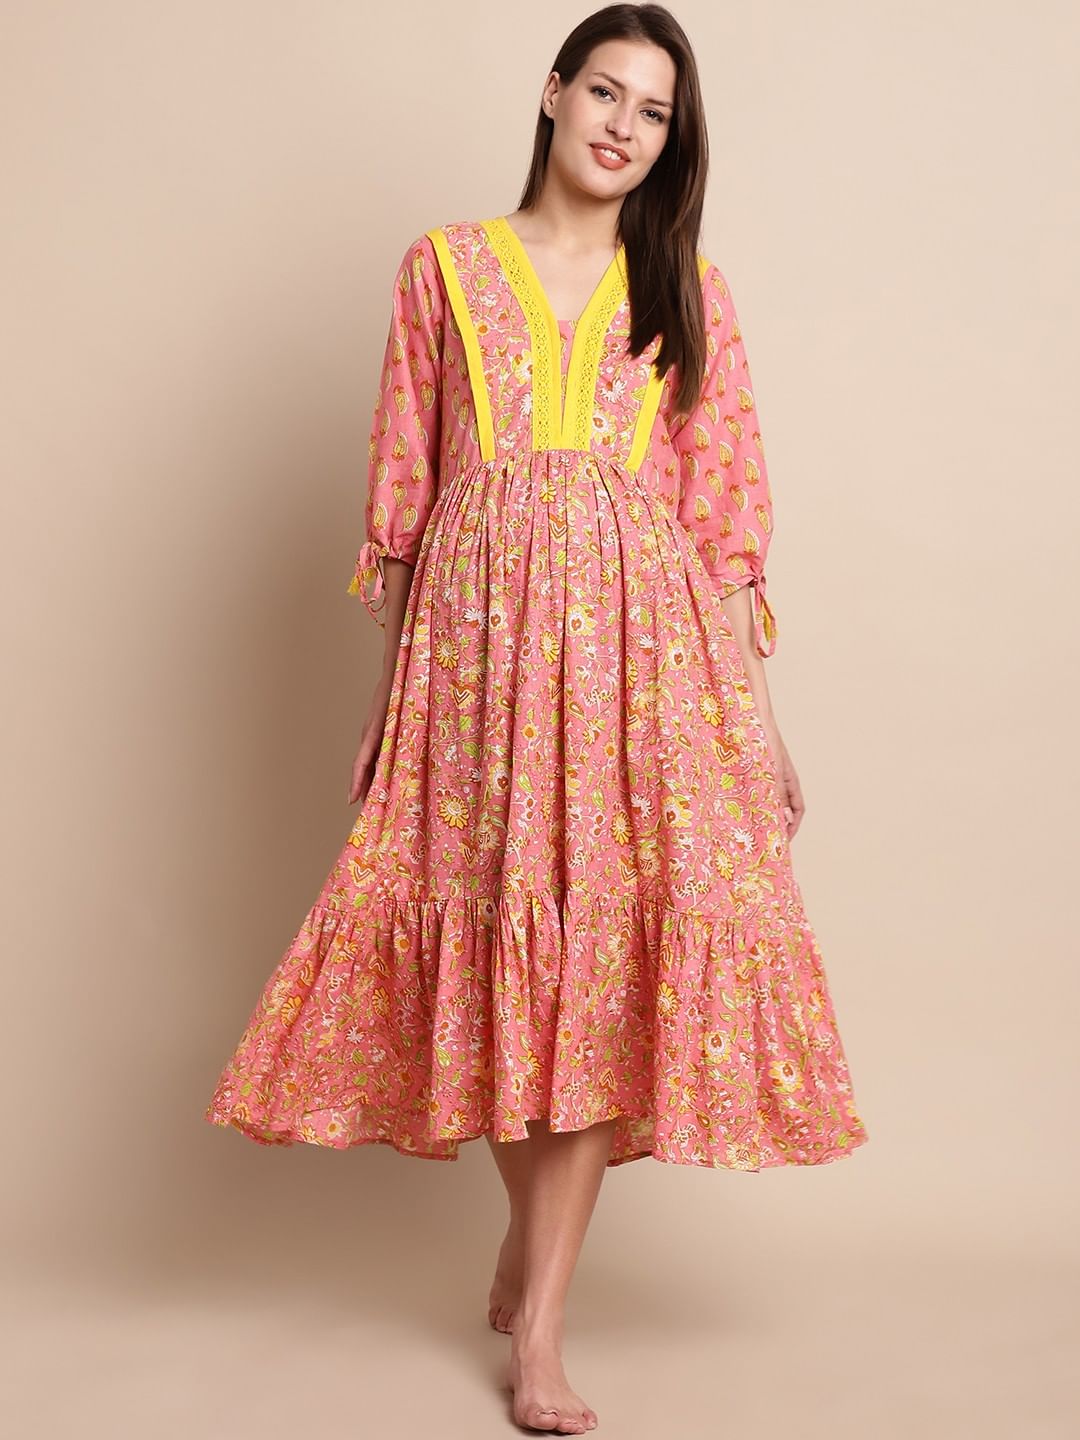 Peach & Yellow Floral Maternity Dress